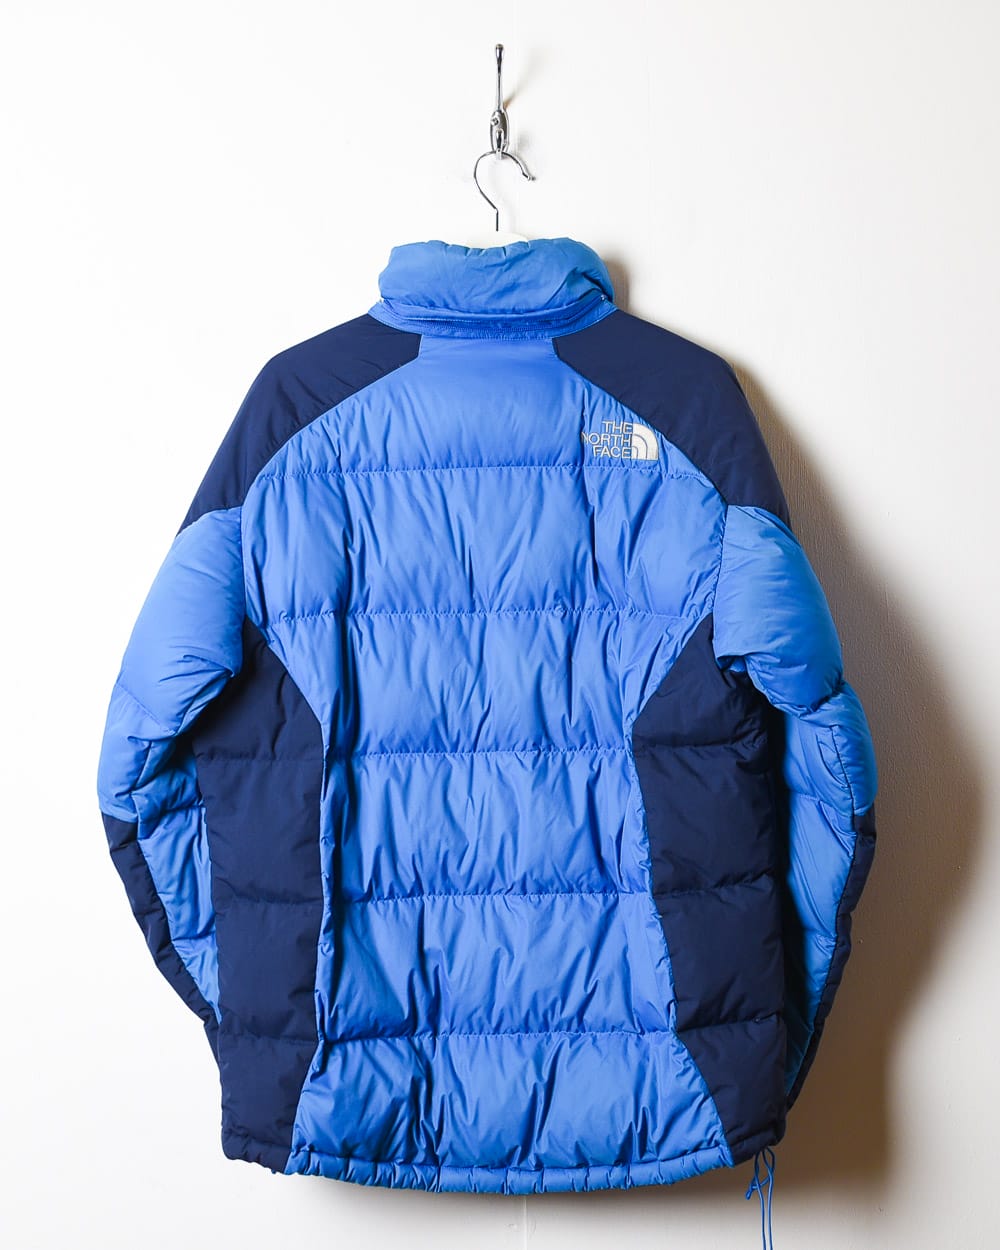 Vintage 00s Blue The North Face 700 Puffer Jacket - Medium